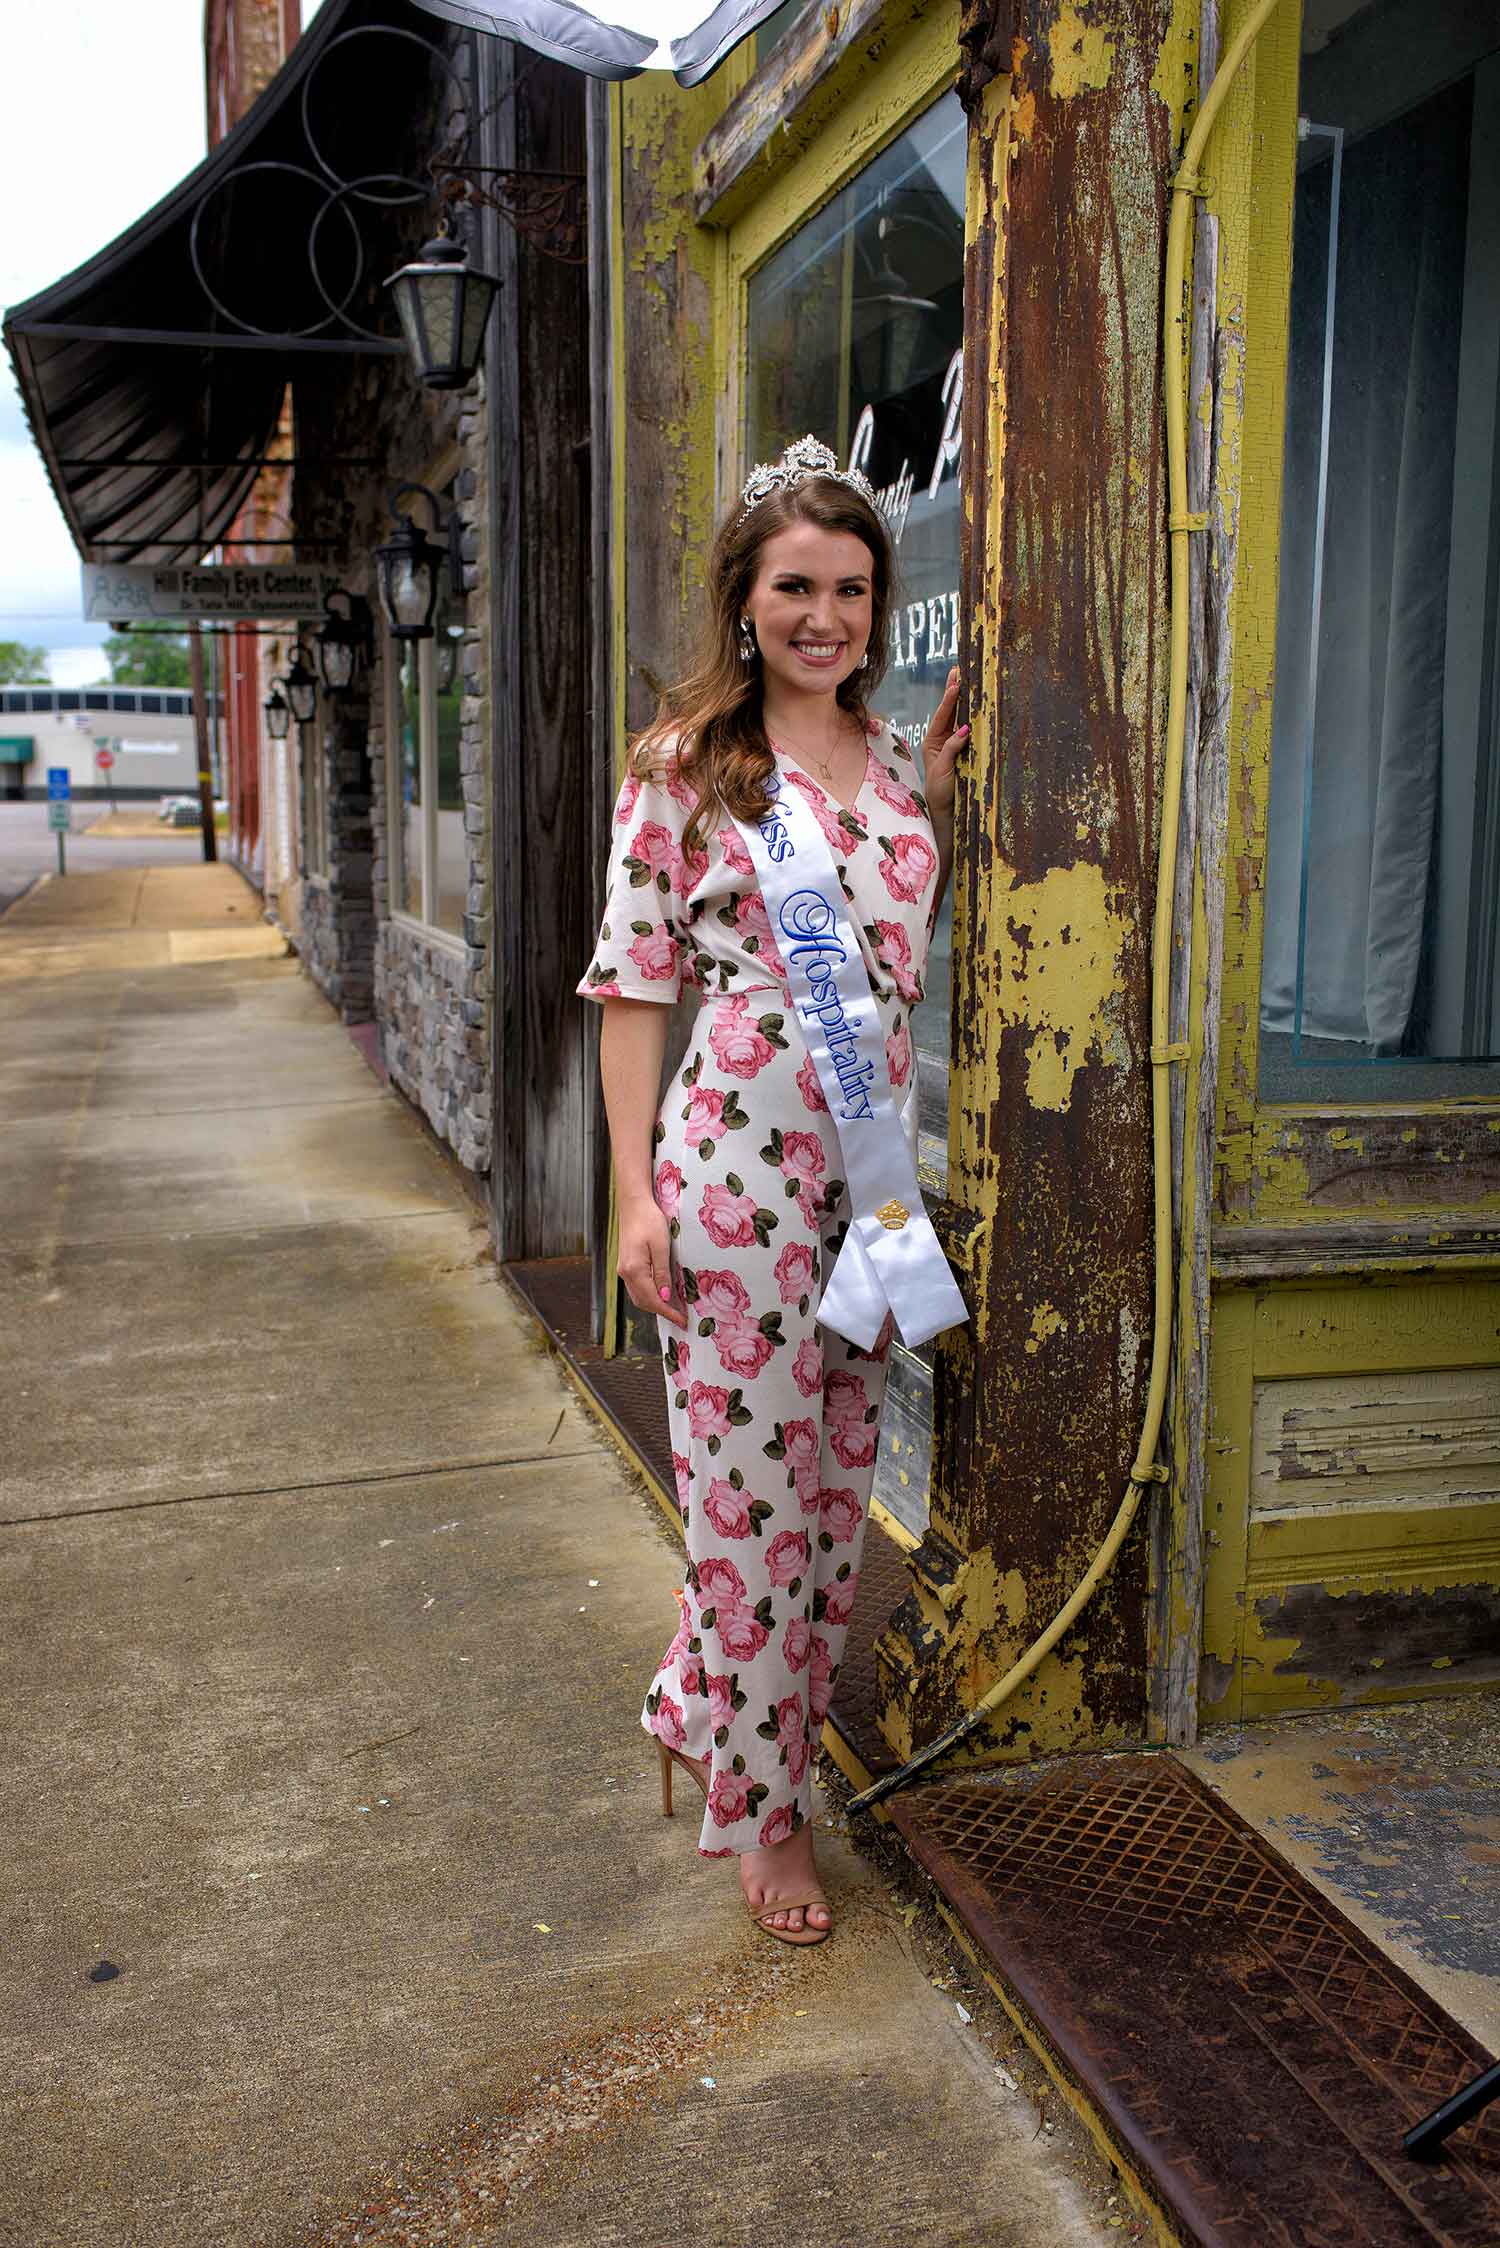 A young woman with brown hair and a silver crown wears a white jumpsuit with pink roses and a white sash embroidered with the words “Miss Hospitality.” She stands with her hand resting on a yellow, chipped wooden storefront.